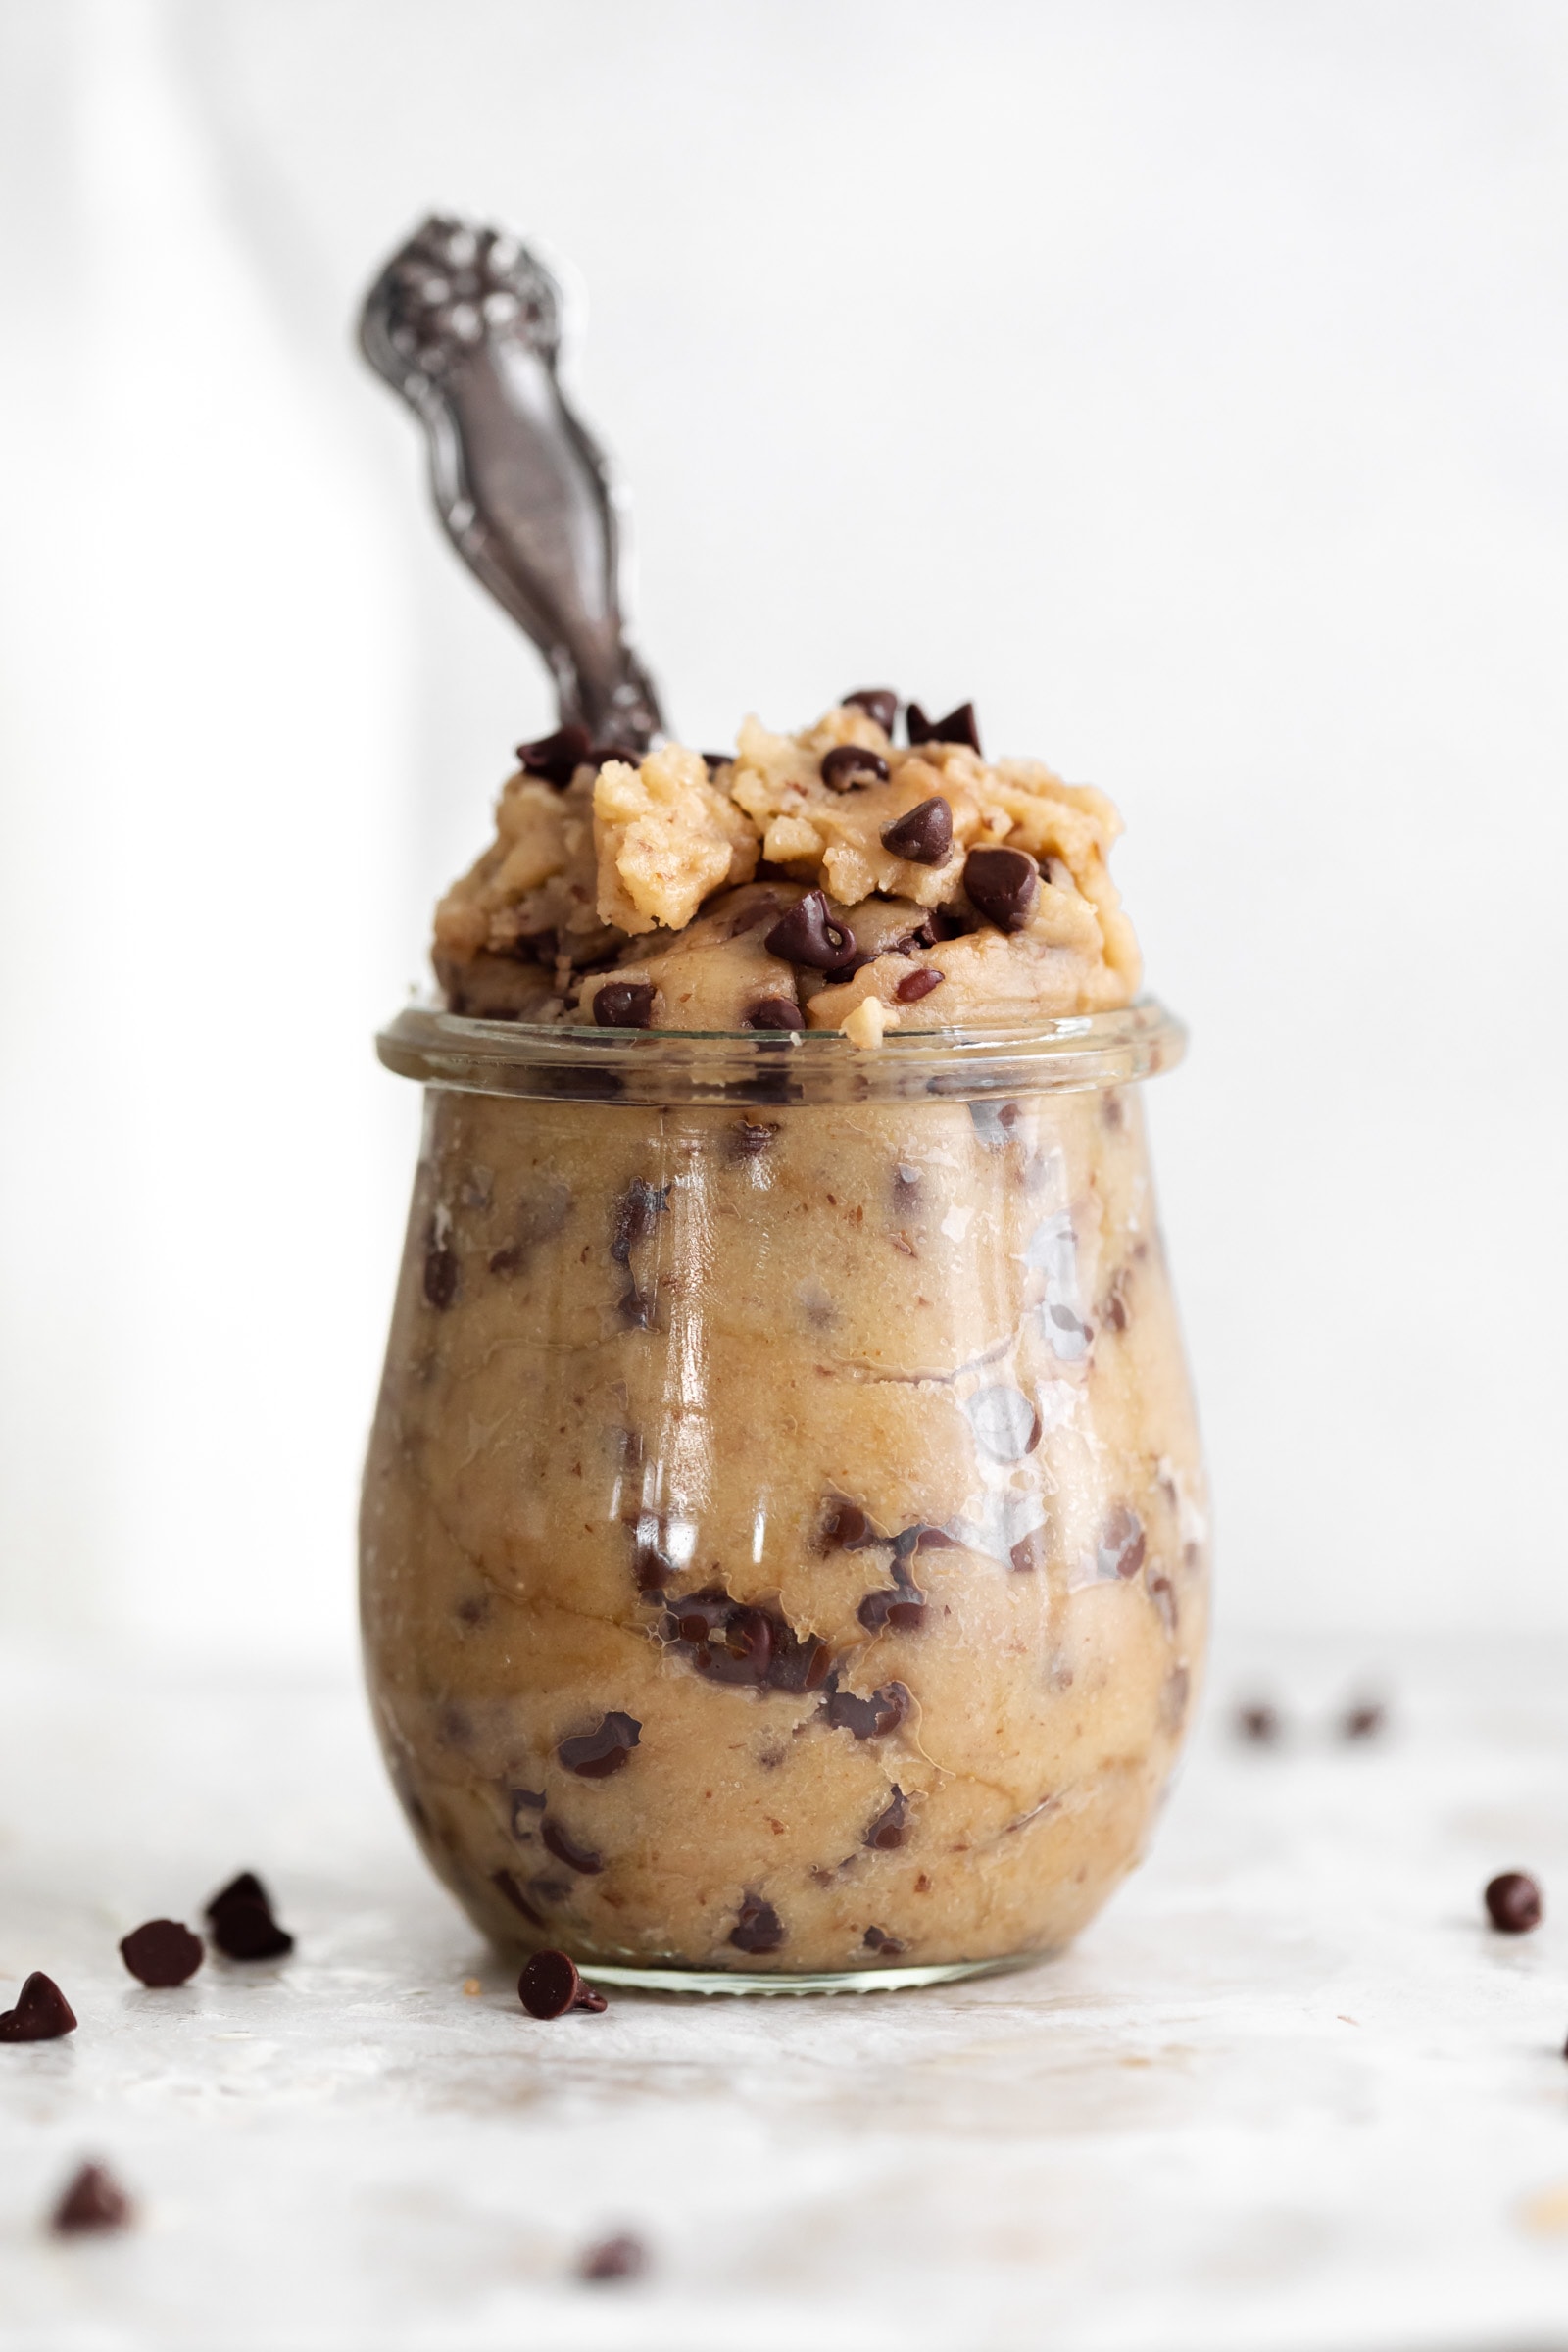 https://bromabakery.com/wp-content/uploads/2022/07/Edible-Cookie-Dough-5.jpg